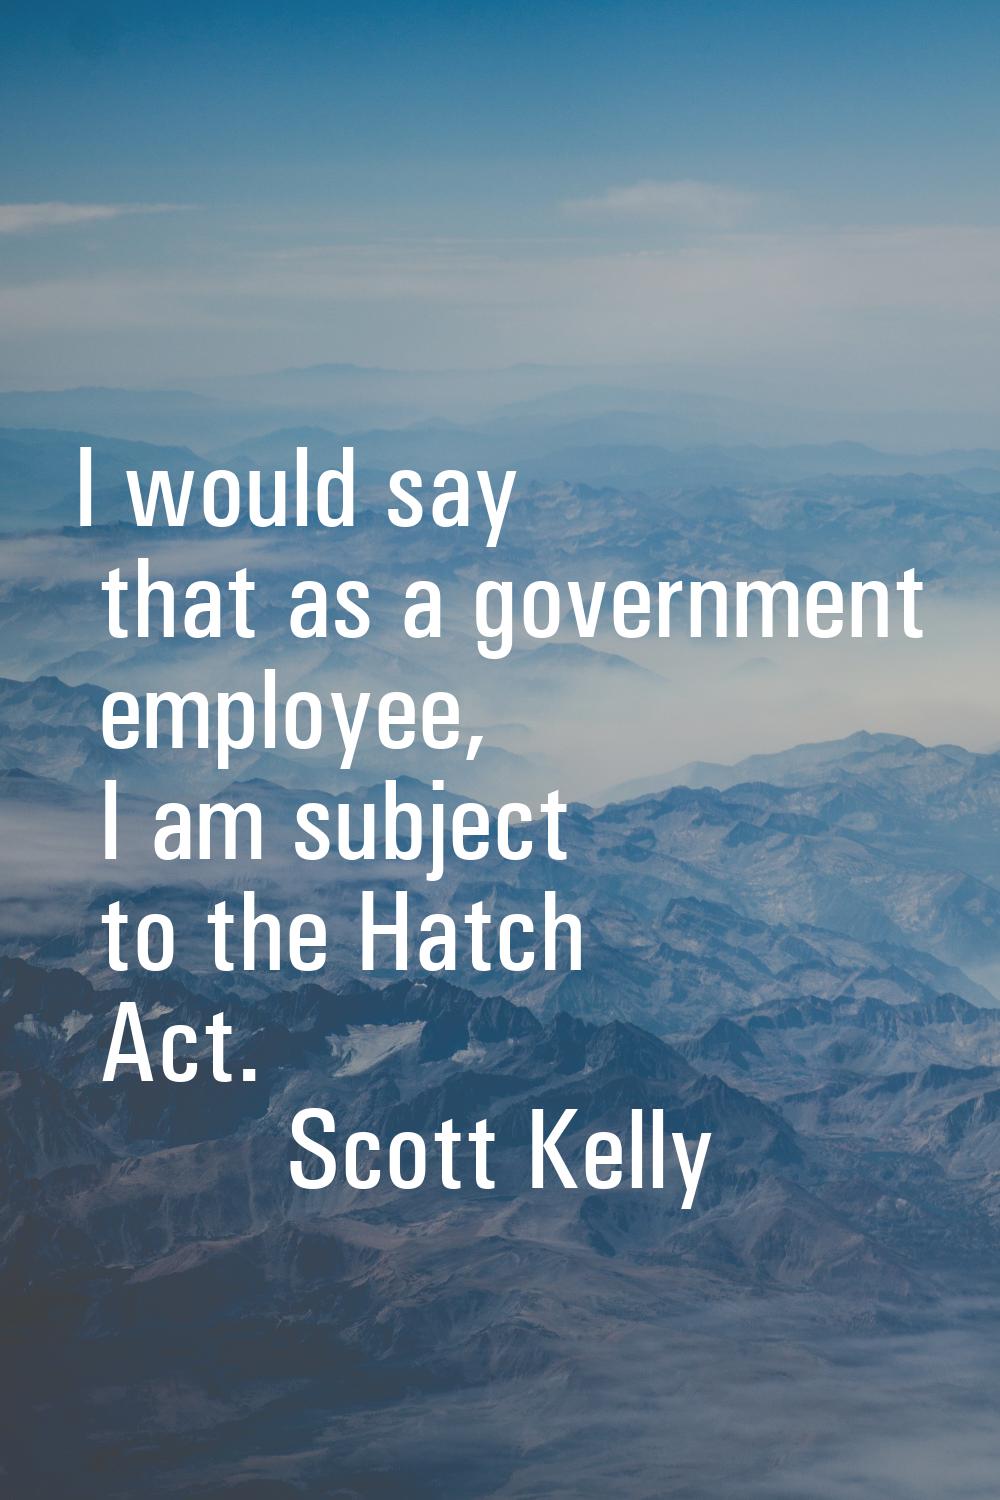 I would say that as a government employee, I am subject to the Hatch Act.